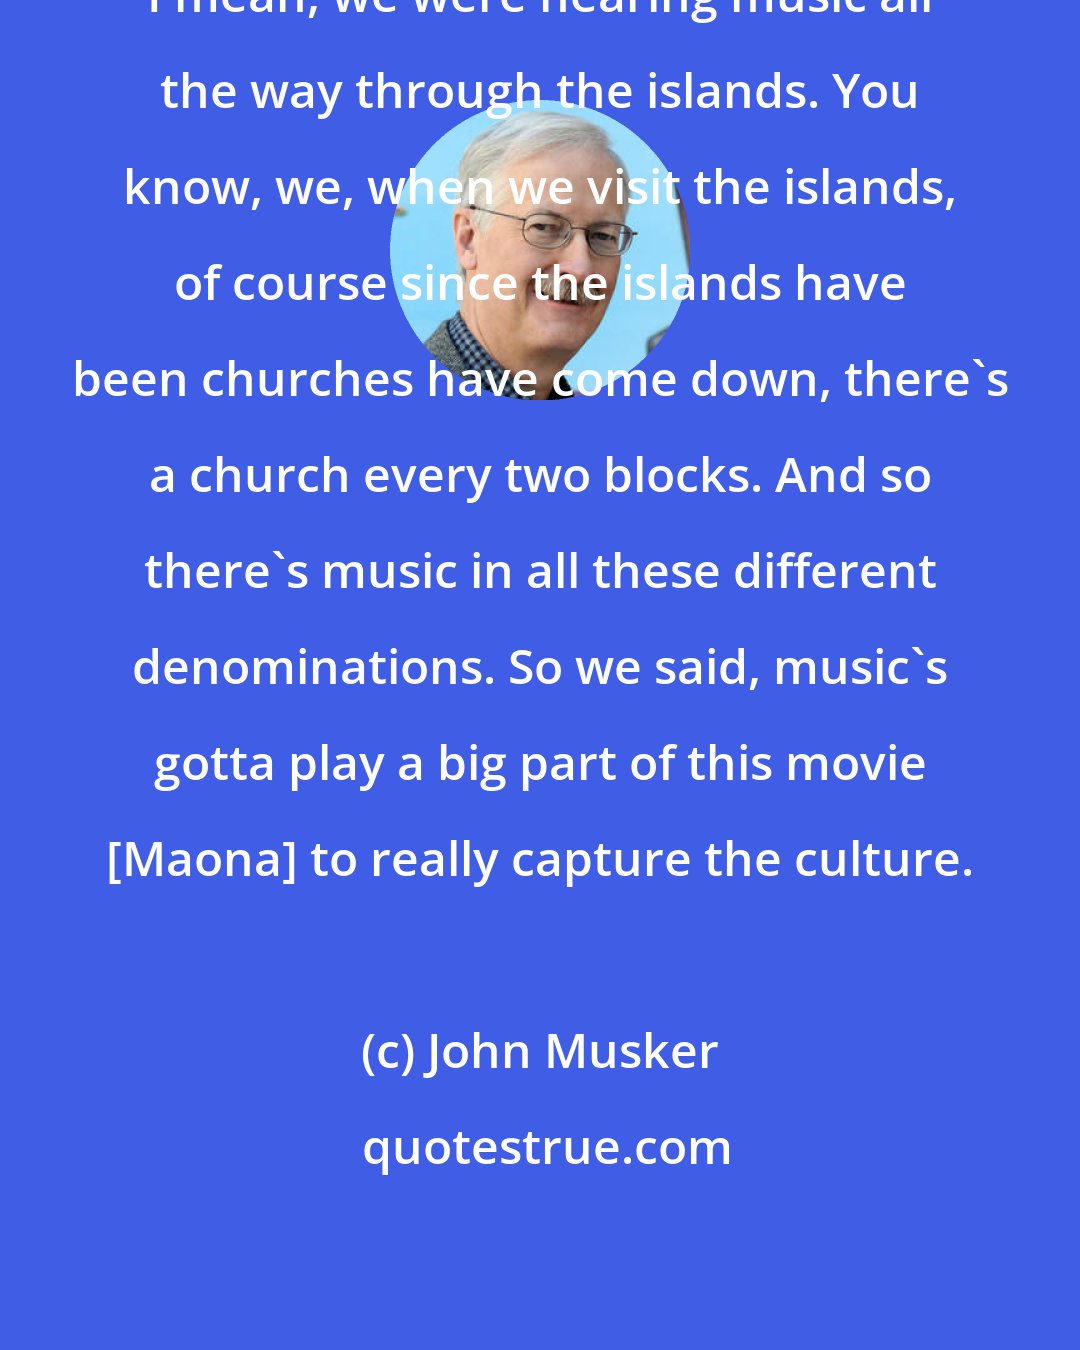 John Musker: I mean, we were hearing music all the way through the islands. You know, we, when we visit the islands, of course since the islands have been churches have come down, there's a church every two blocks. And so there's music in all these different denominations. So we said, music's gotta play a big part of this movie [Maona] to really capture the culture.